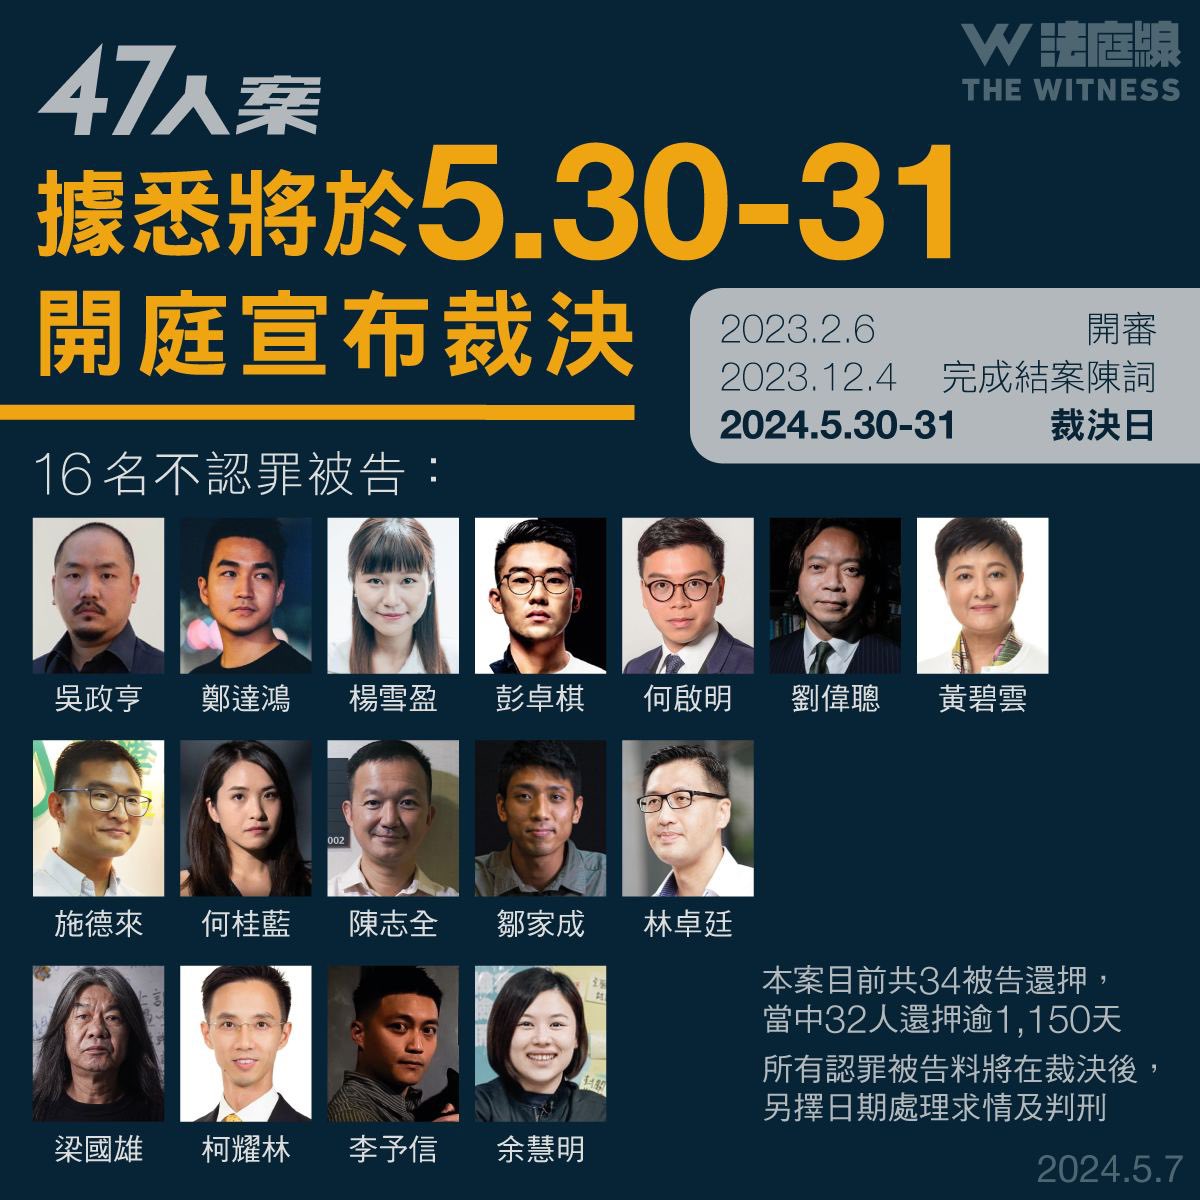 The verdict in the trial of the 16 of the #HK47 who plead not guilty will be on May 30-31. They face the “national security” charge of “conspiracy to commit subversion” for participating in a pro-democracy primary election. bit.ly/44zeiOc